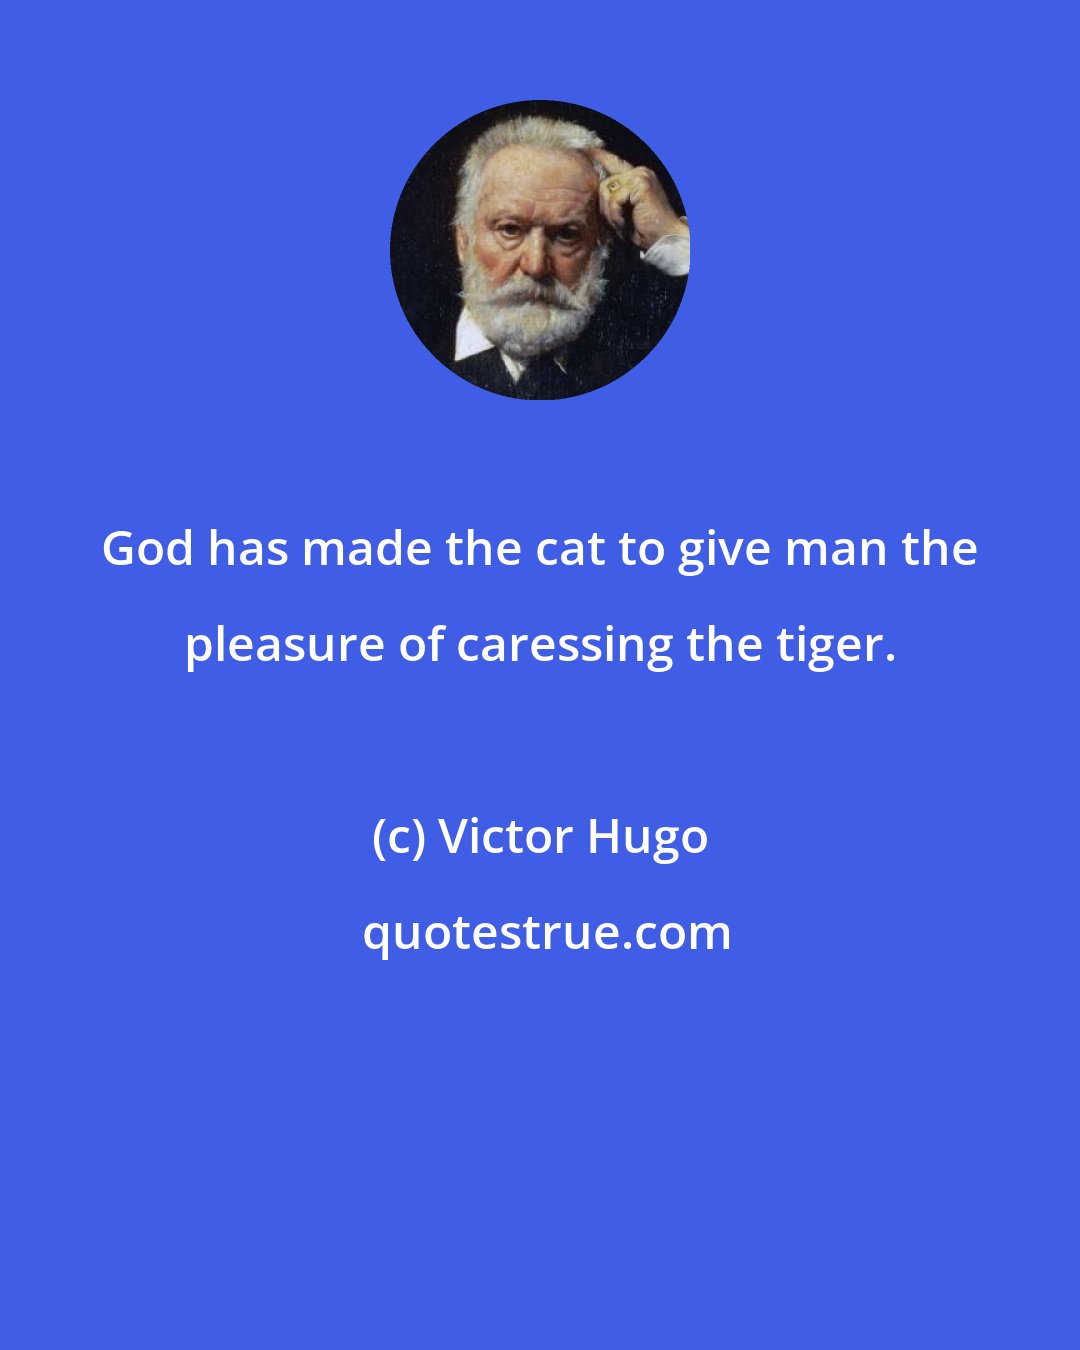 Victor Hugo: God has made the cat to give man the pleasure of caressing the tiger.